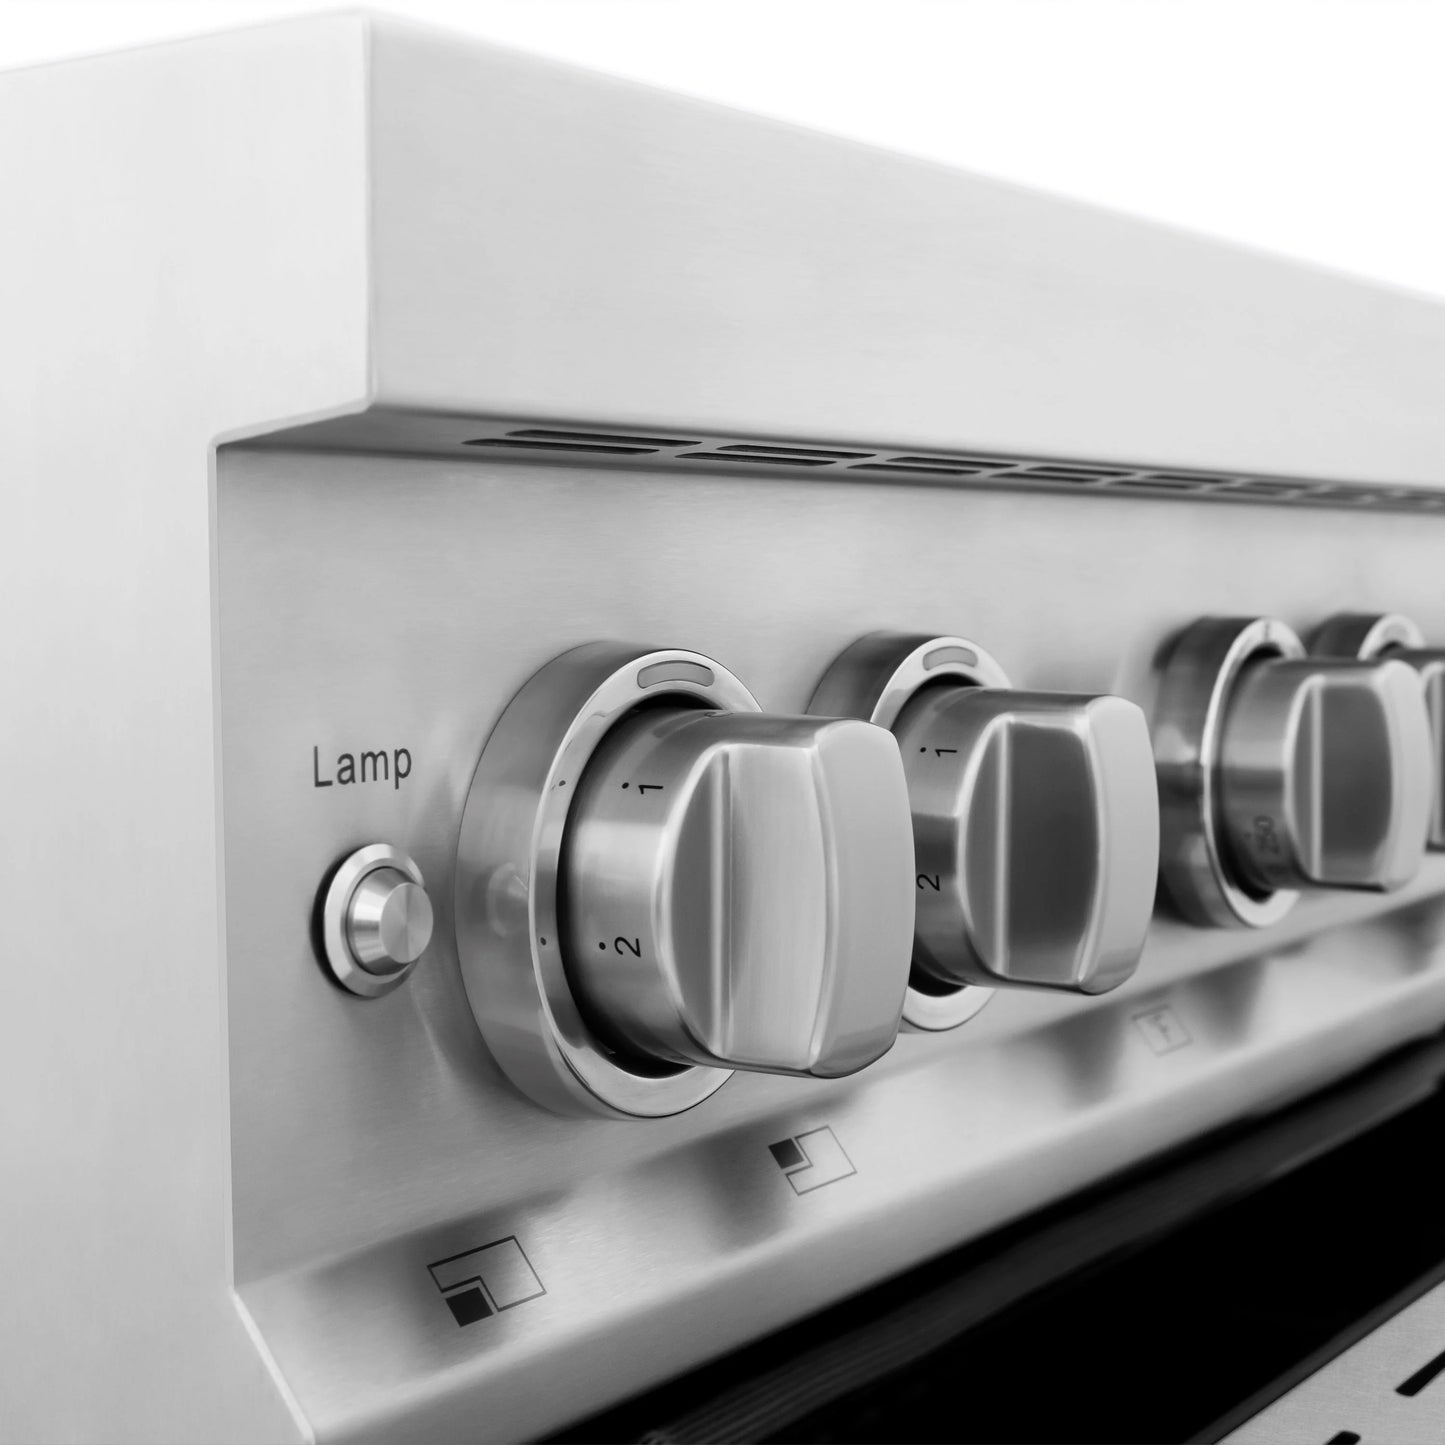 ZLINE 30 in. Induction Range with a 3 Element Stove and Electric Oven in Stainless Steel (RAIND-30)